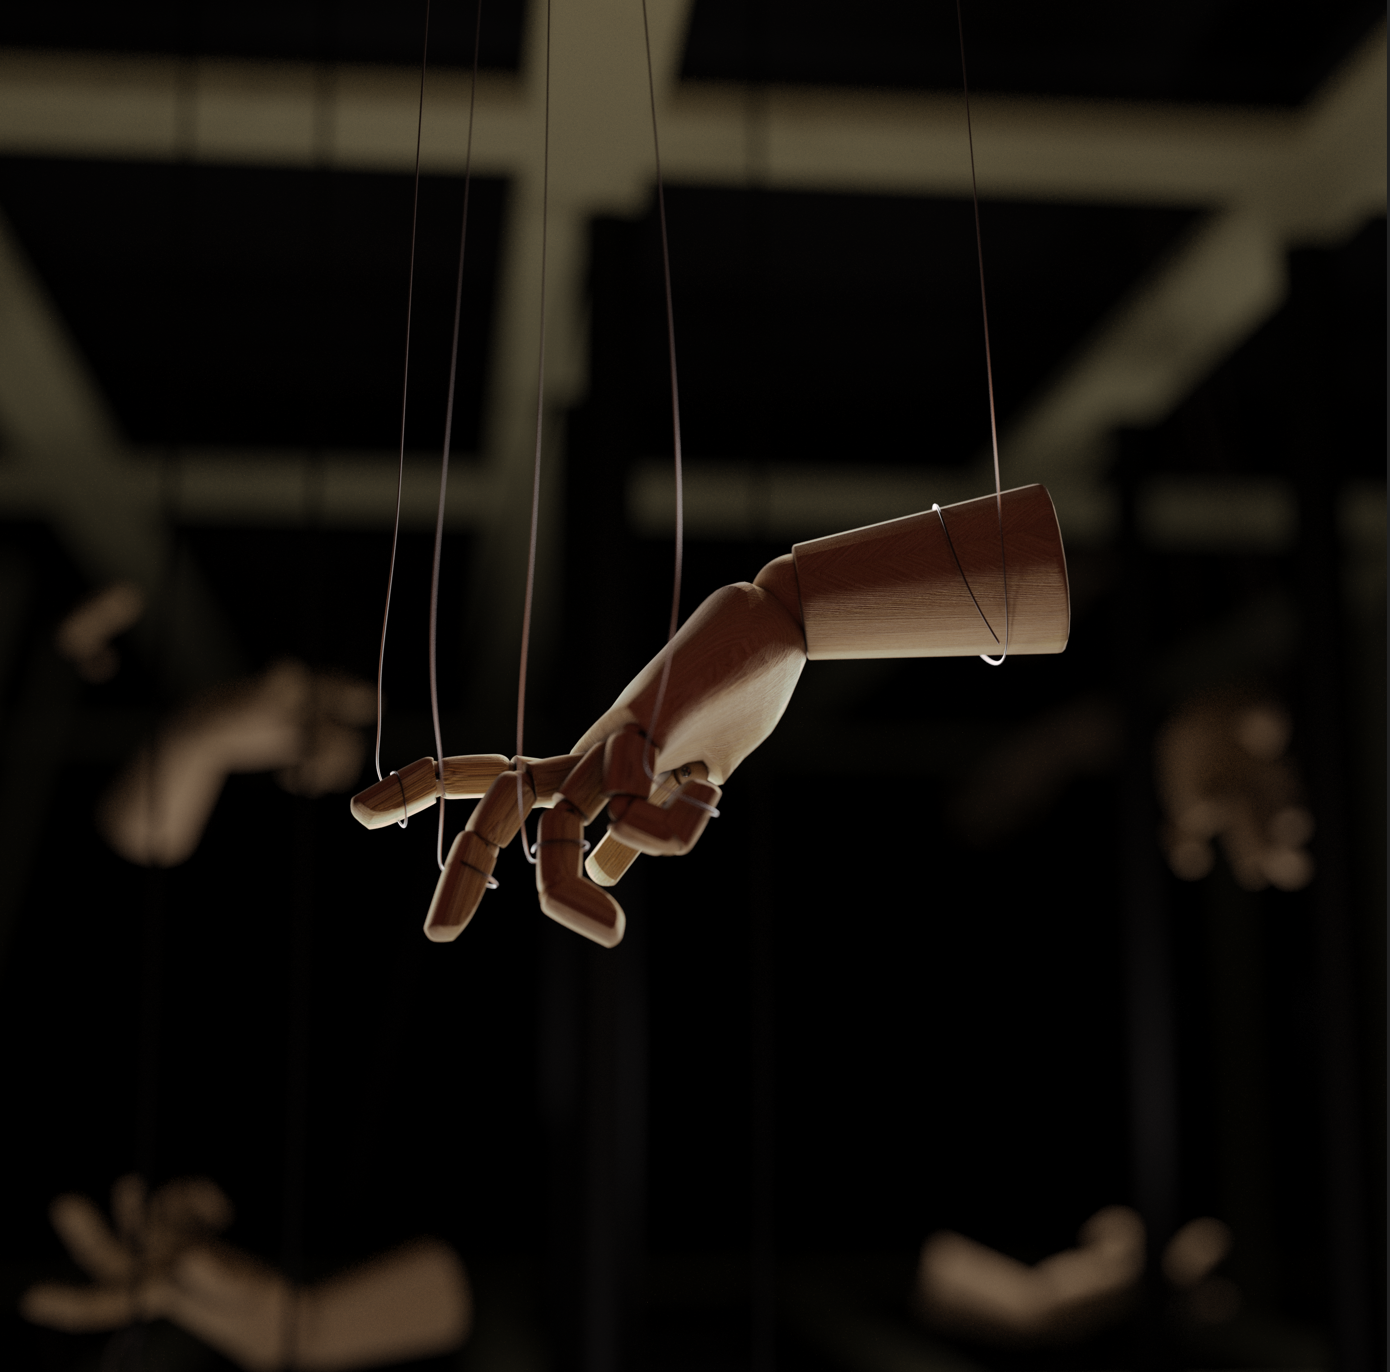 Student Made Hands Model